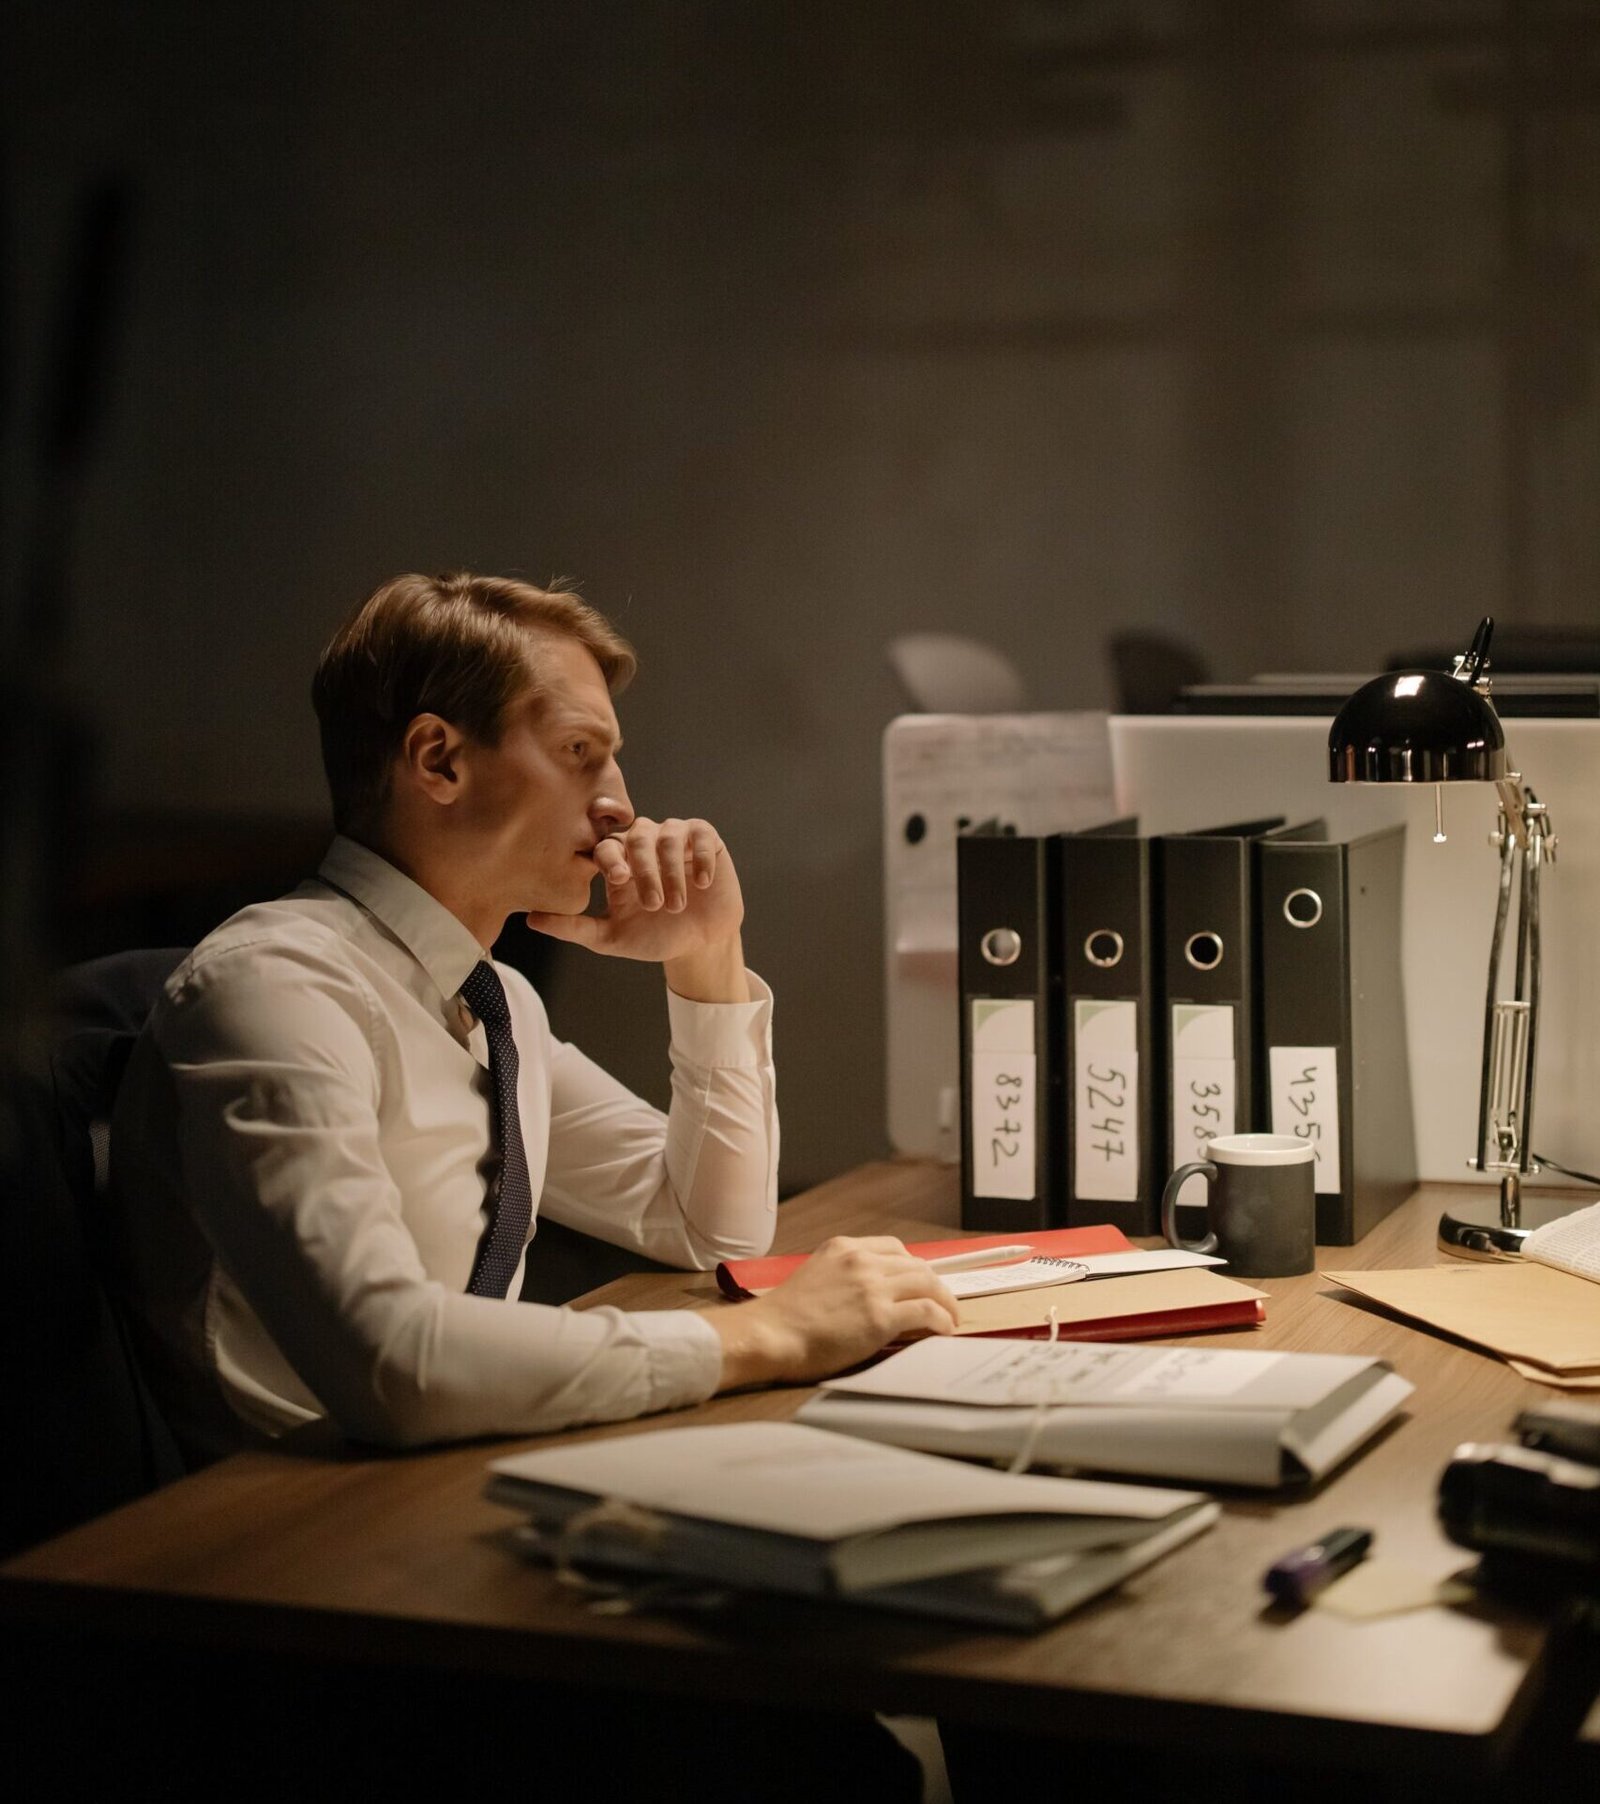 Thoughtful Man in White Shirt and Black Tie Sitting at a Desk with File Folders